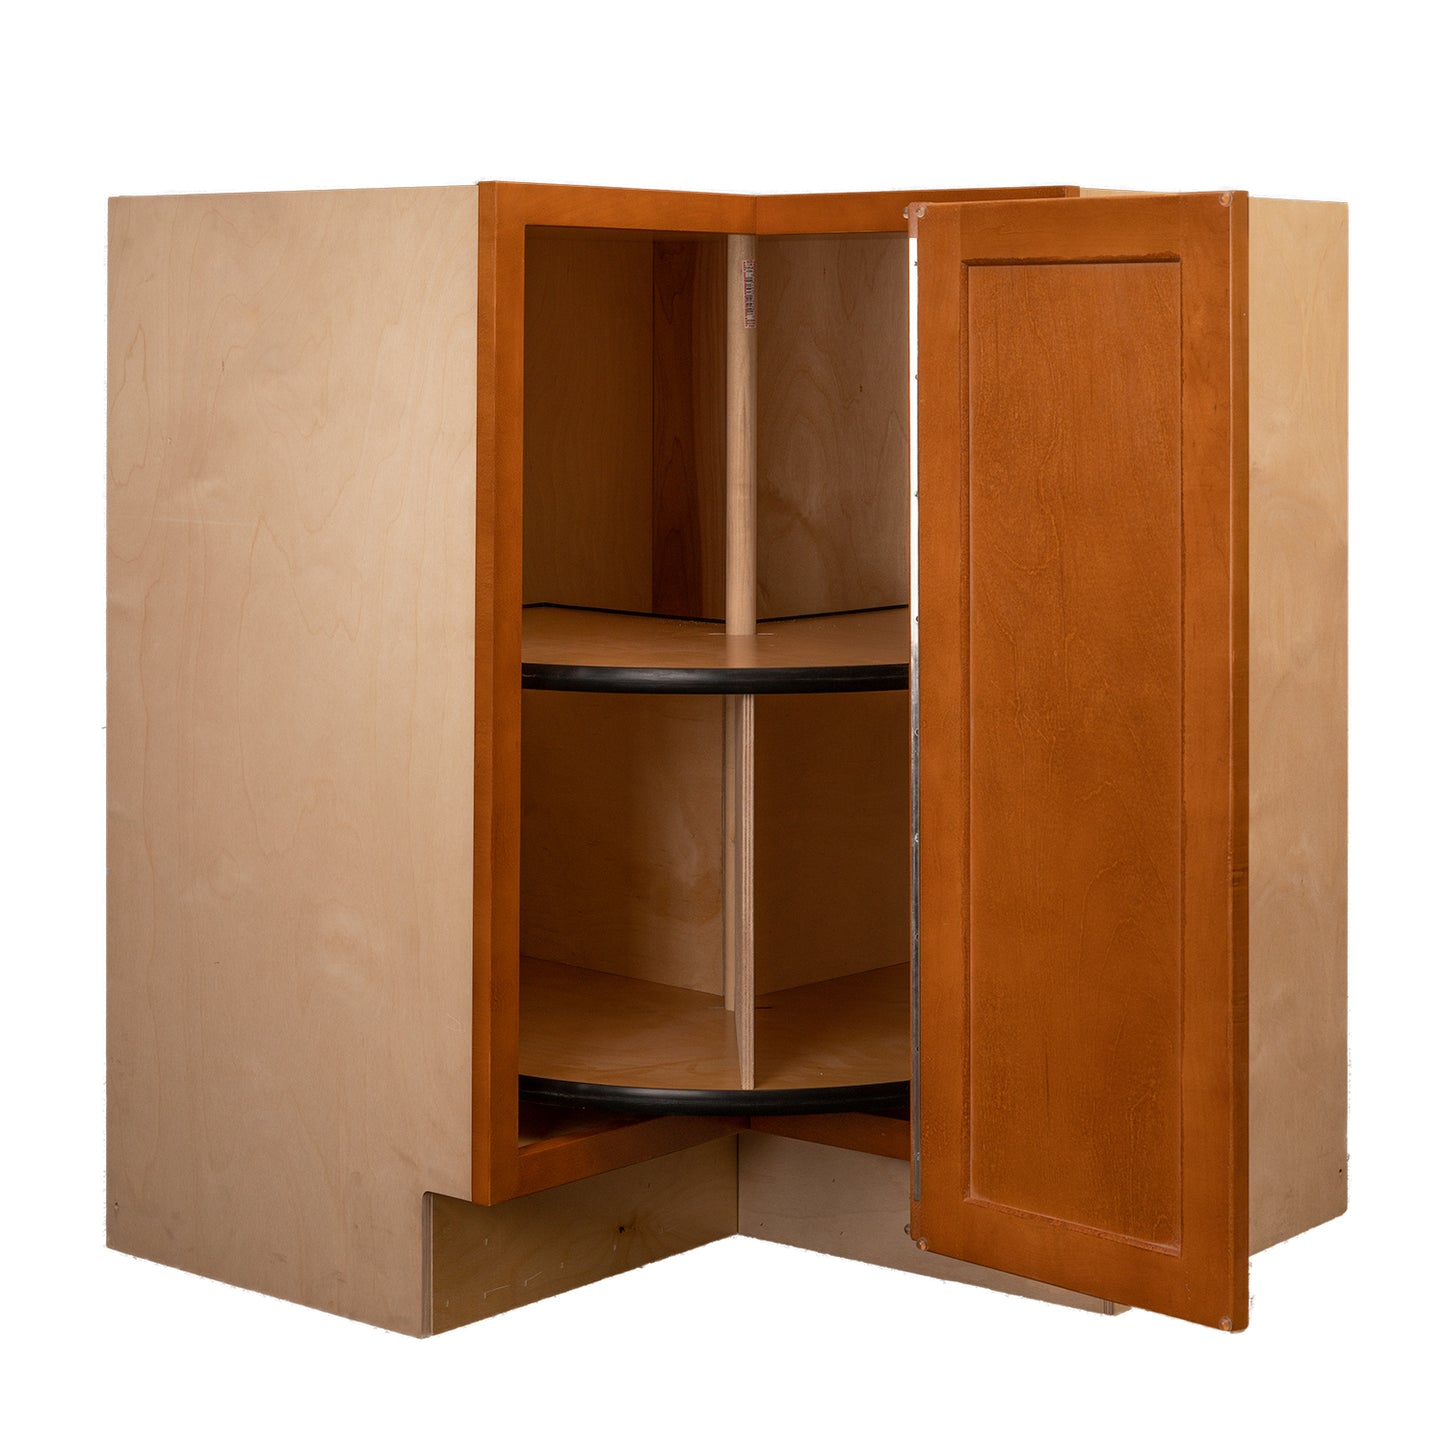 Quicklock RTA (Ready-to-Assemble) Provincial Stain Lazy Susan Cabinet | 18"D x 30" W x 34.5"